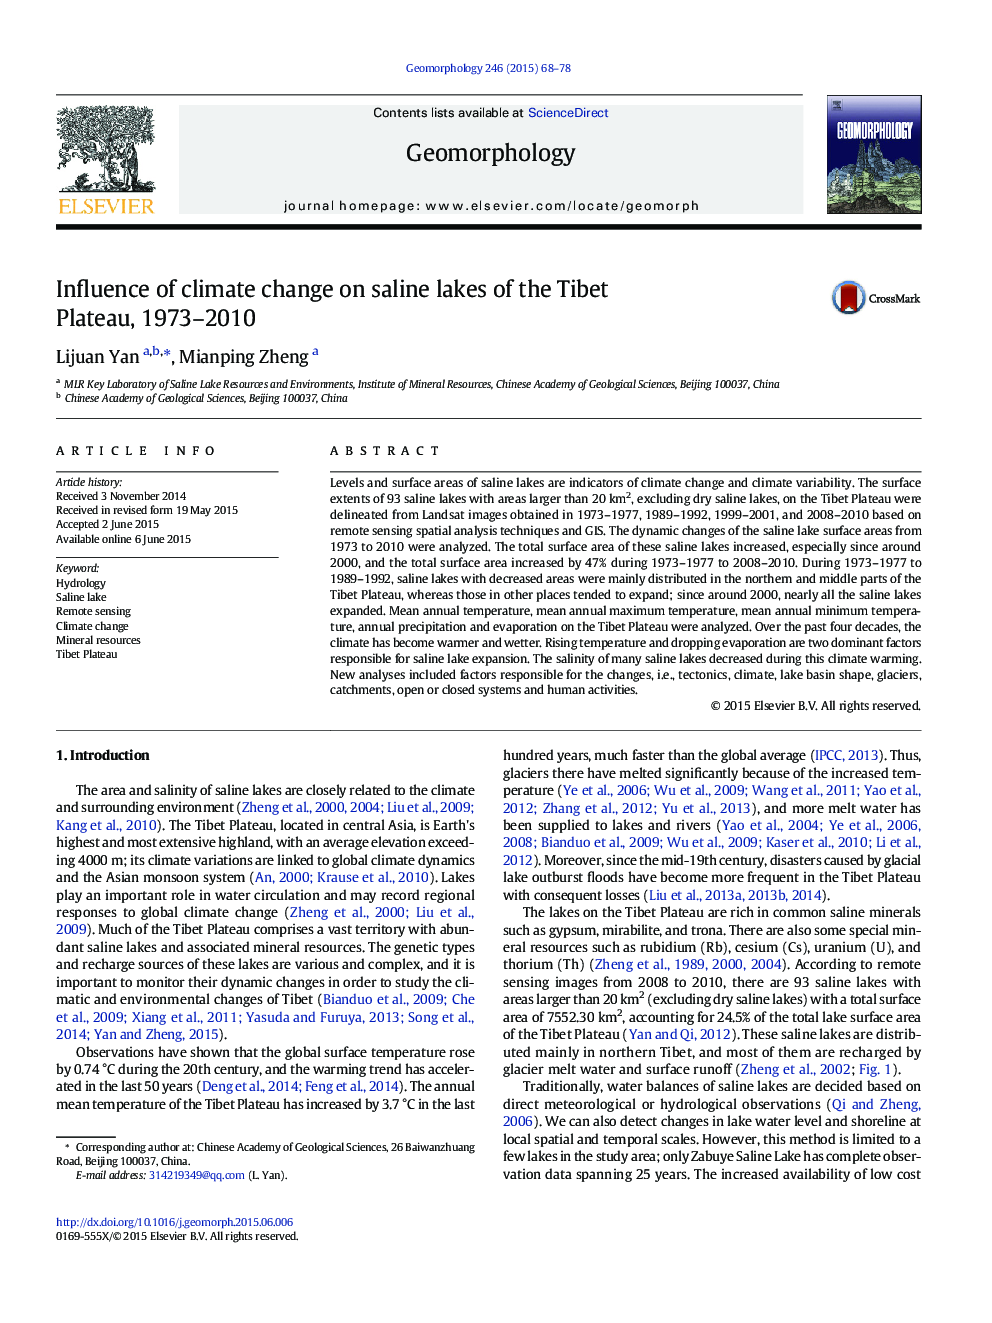 Influence of climate change on saline lakes of the Tibet Plateau, 1973-2010